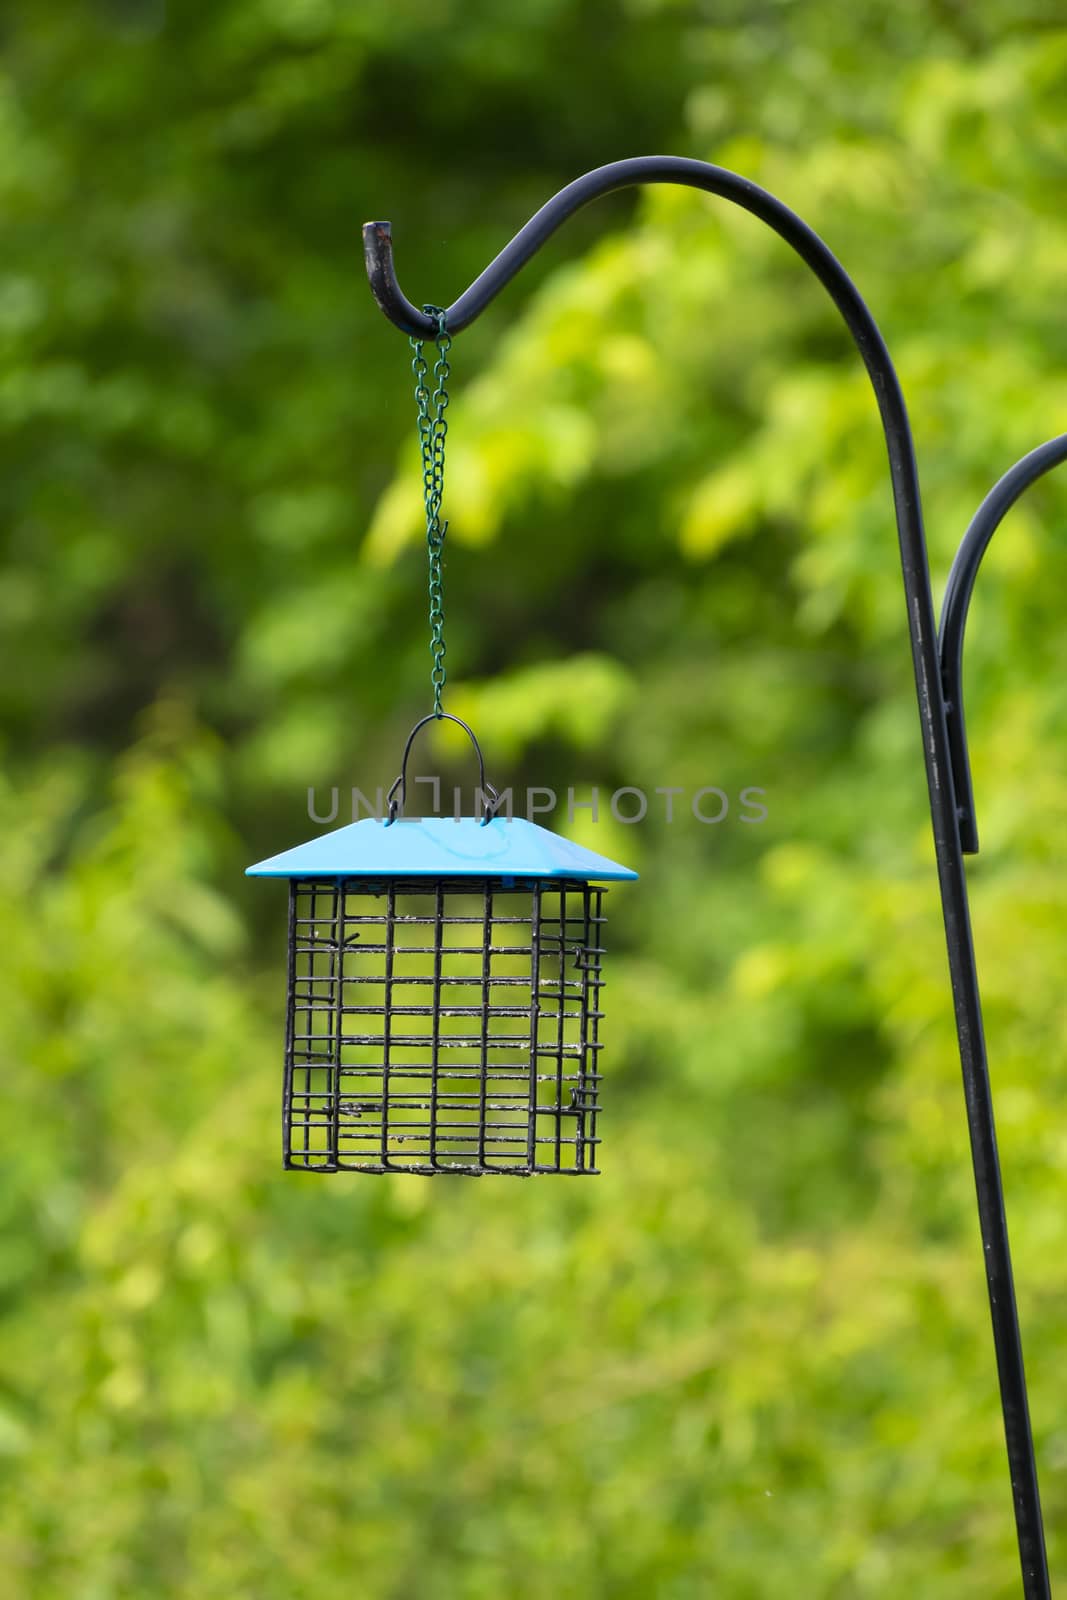 Vertical shot of a completely empty hanging bird feeder with out of focus greenery behind it.